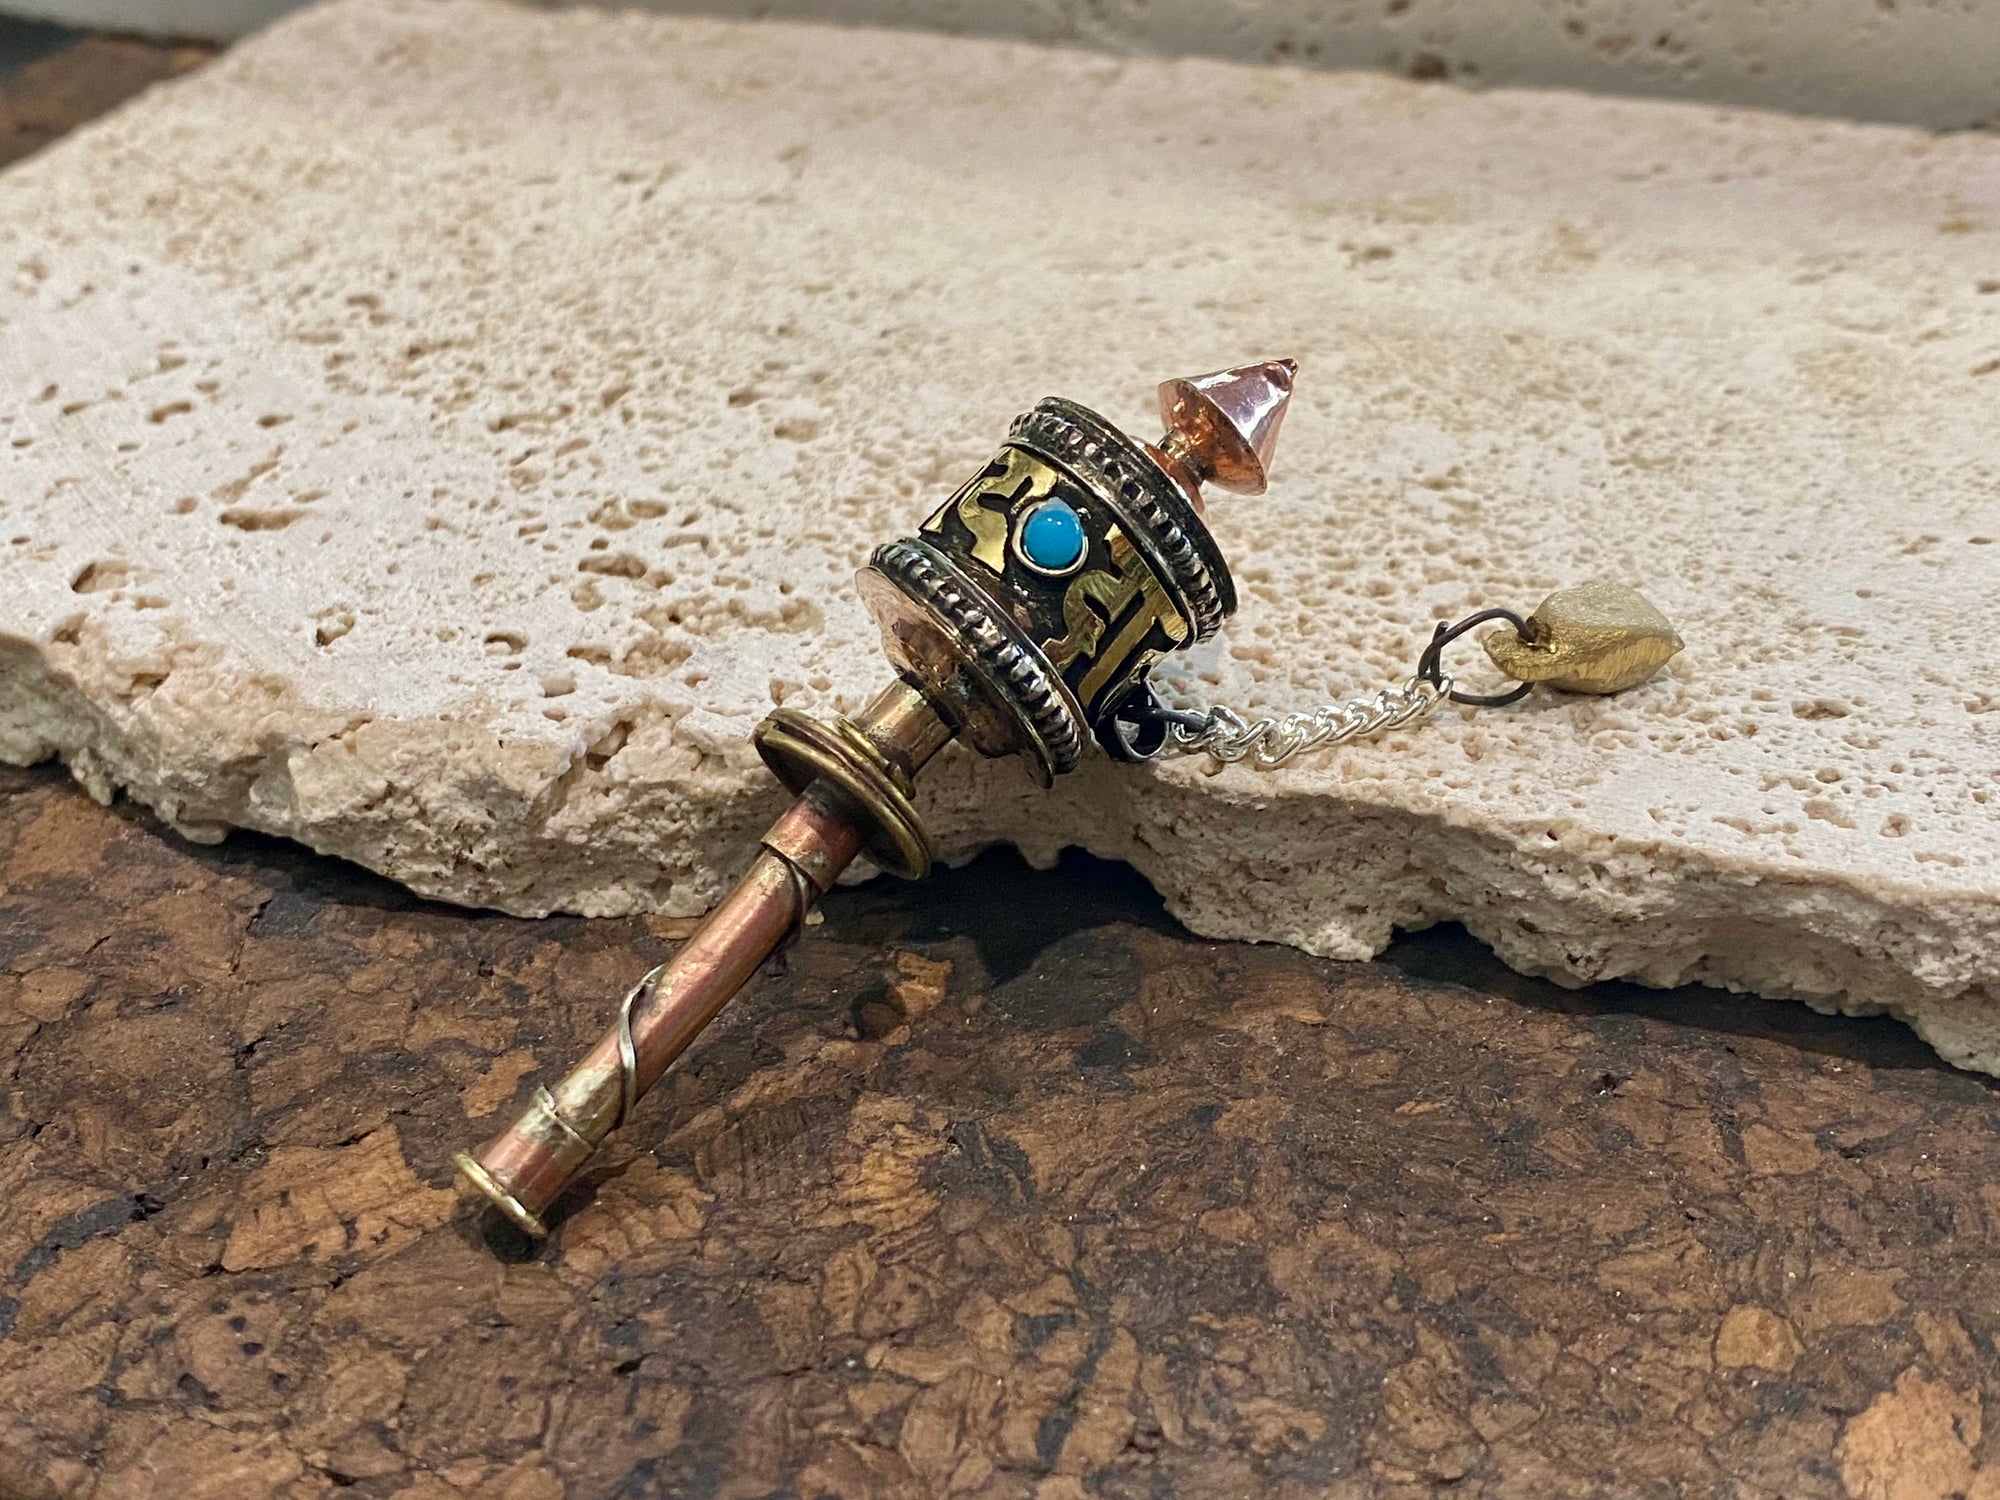 Miniature Buddhist prayer wheel. Copper and brass. Prayer scroll is written with the mantra Om Mani Padme Hum. Length 6.5 cm